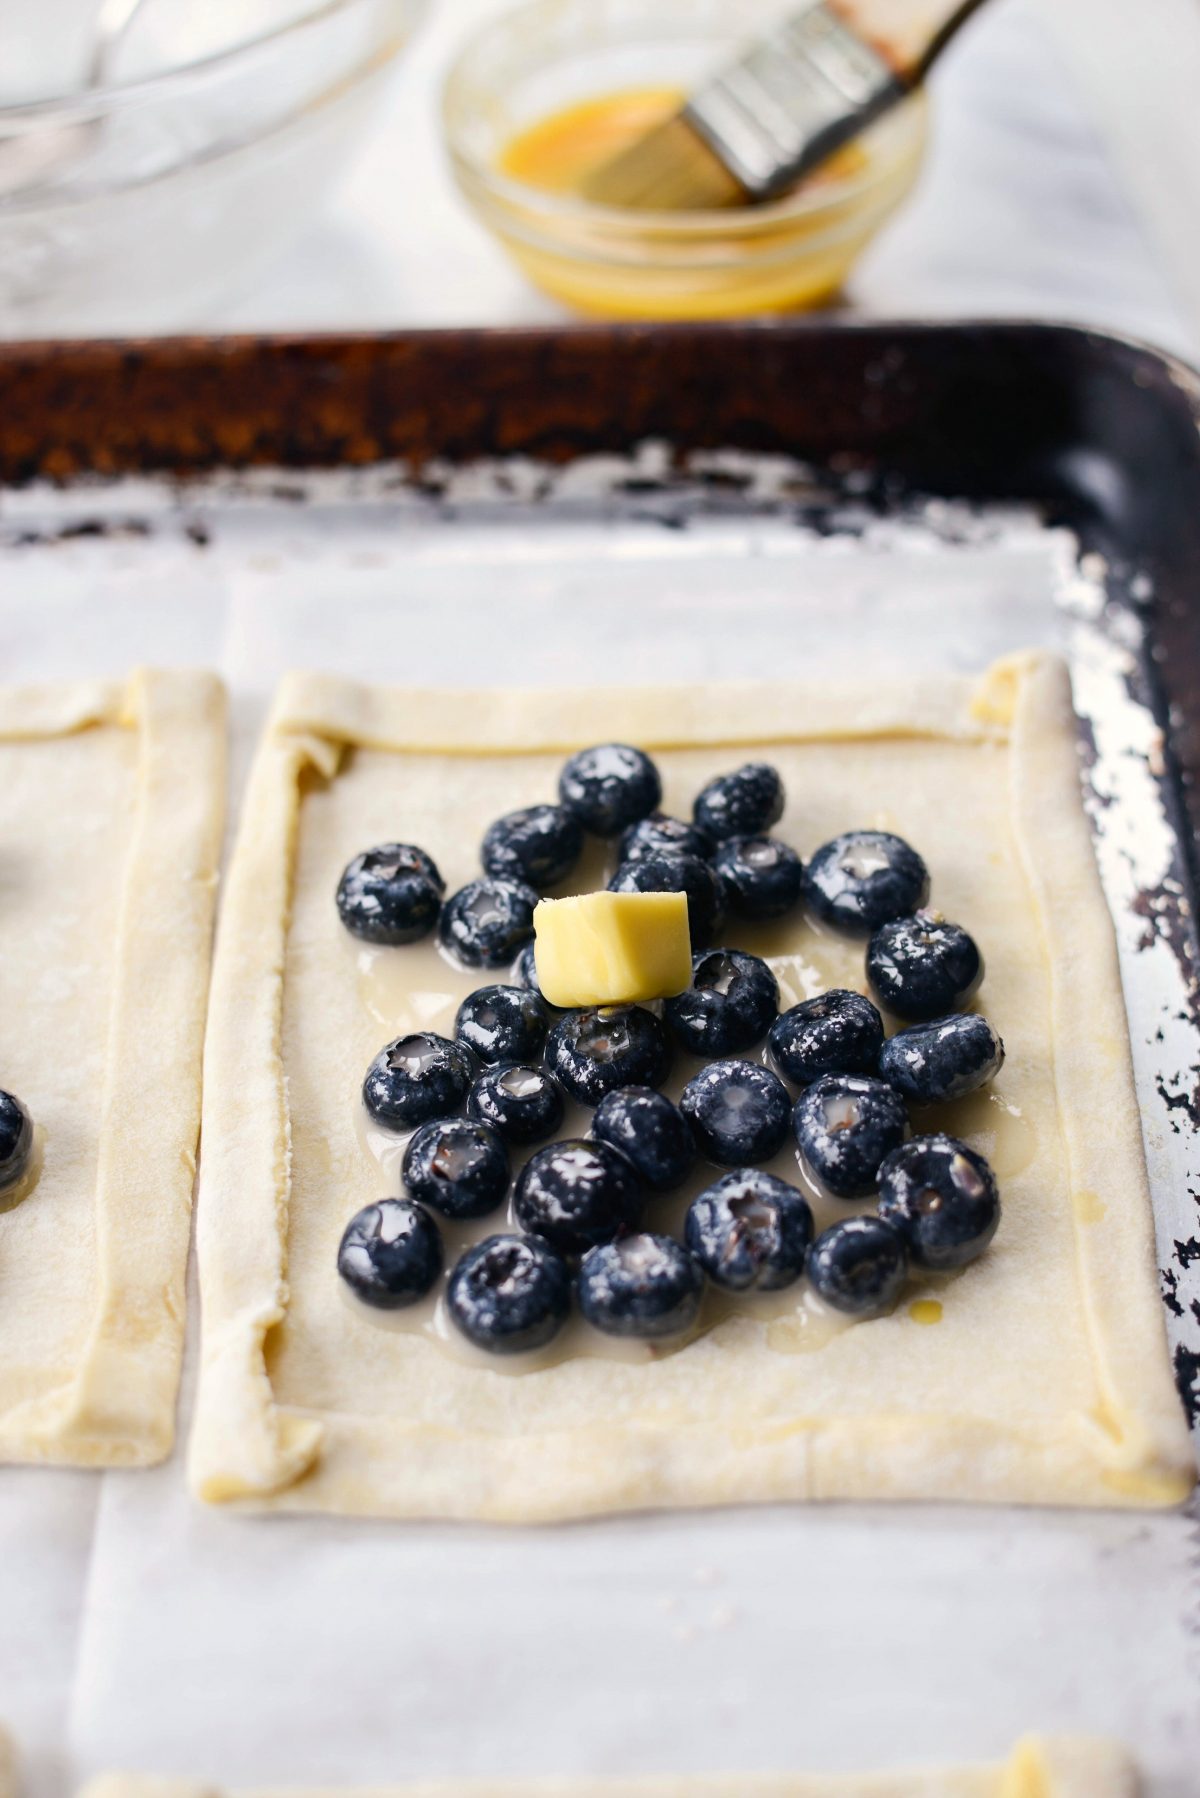 divide blueberries among puff pastry squares and dot with butter